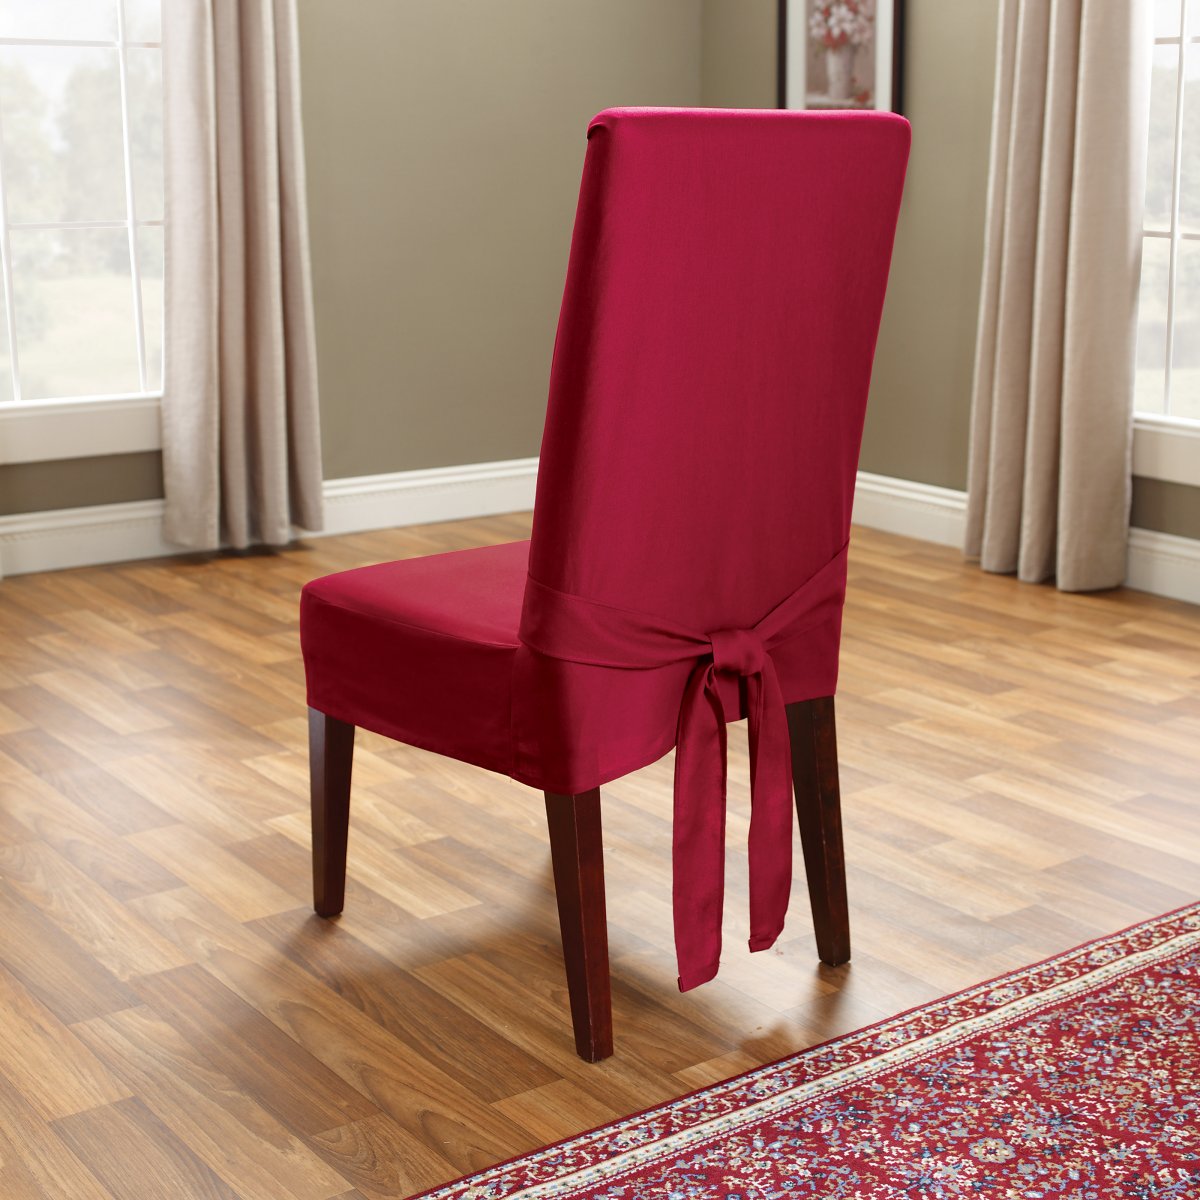 cover for dining chair photo - 1